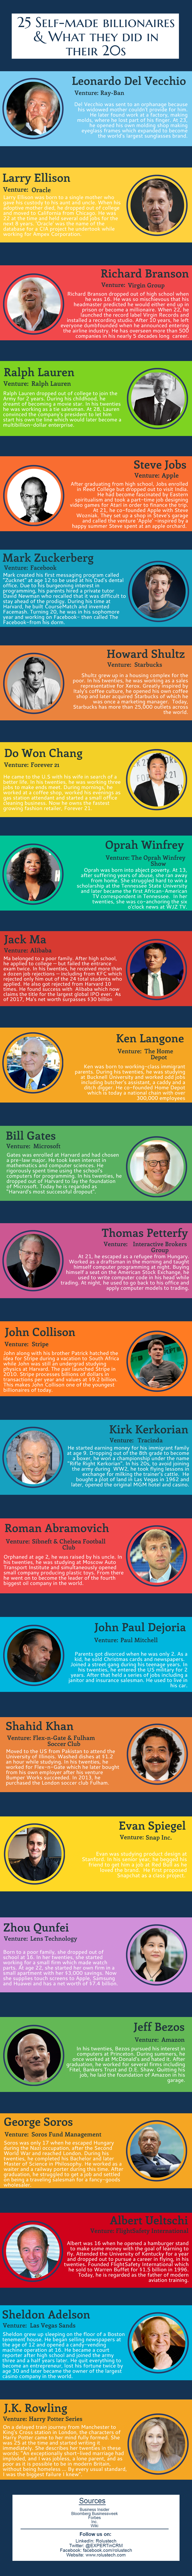 Billionaires and What They Did in their Twenties